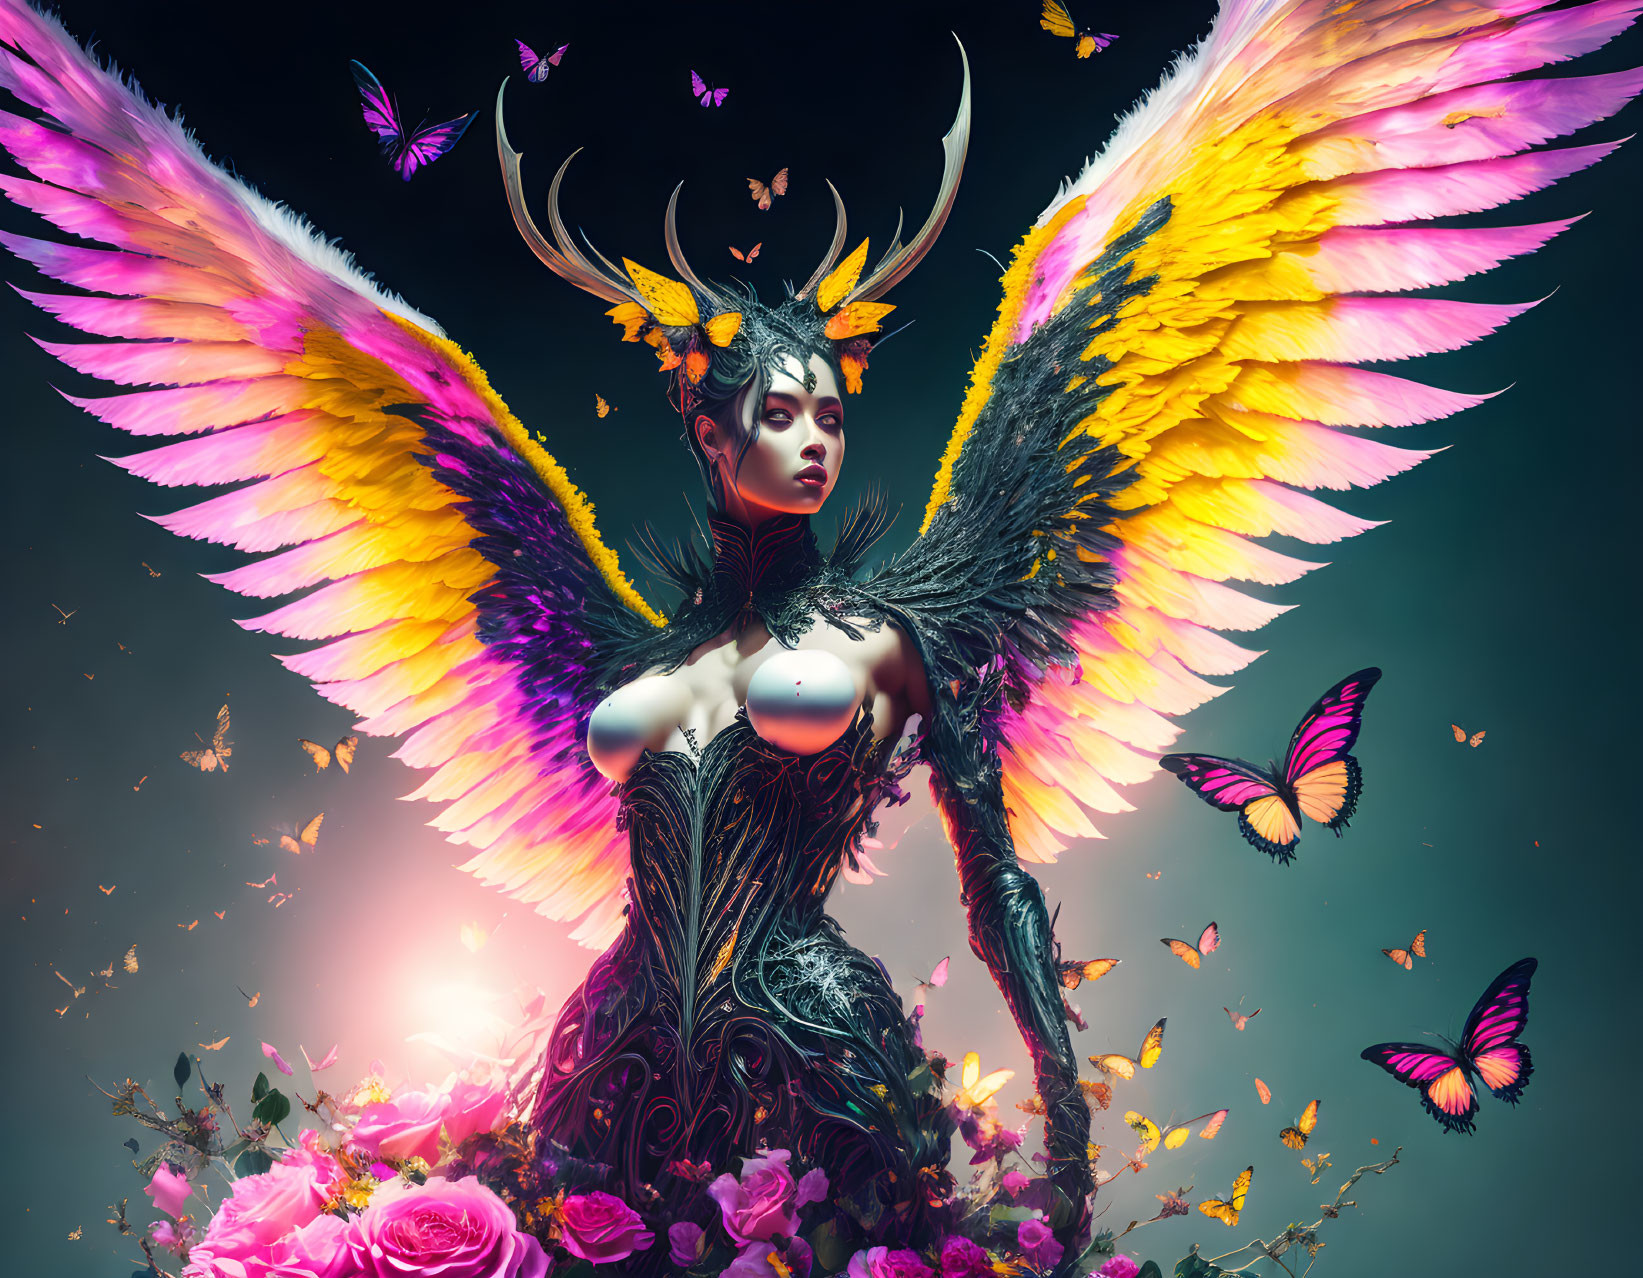 Colorful winged female figure in ornate armor with butterflies and roses on moody background